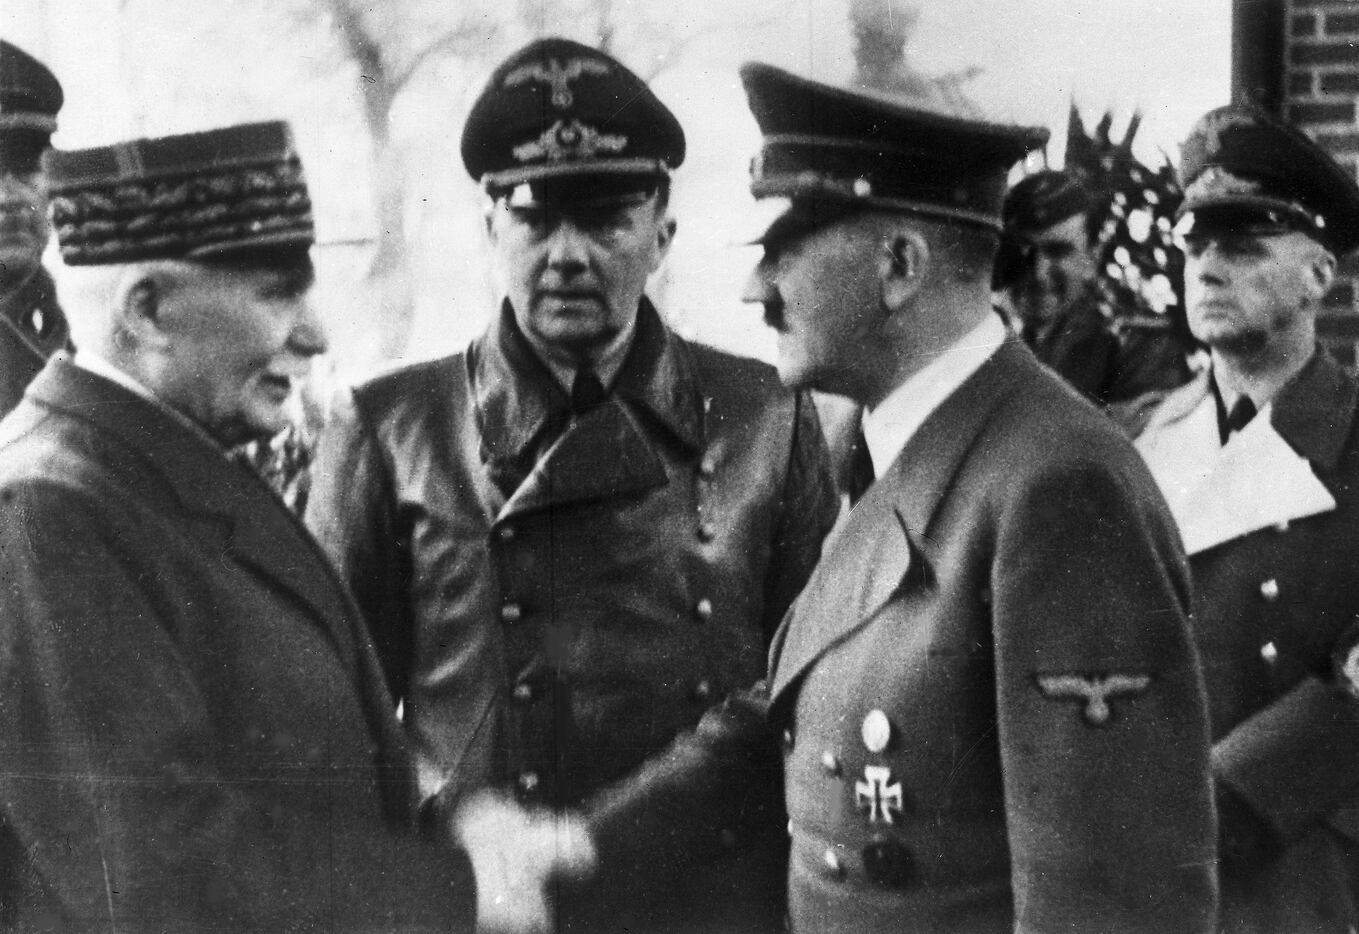 A photo taken Oct. 24, 1940, shows Adolf Hitler (right) shaking hands with Head of State of...